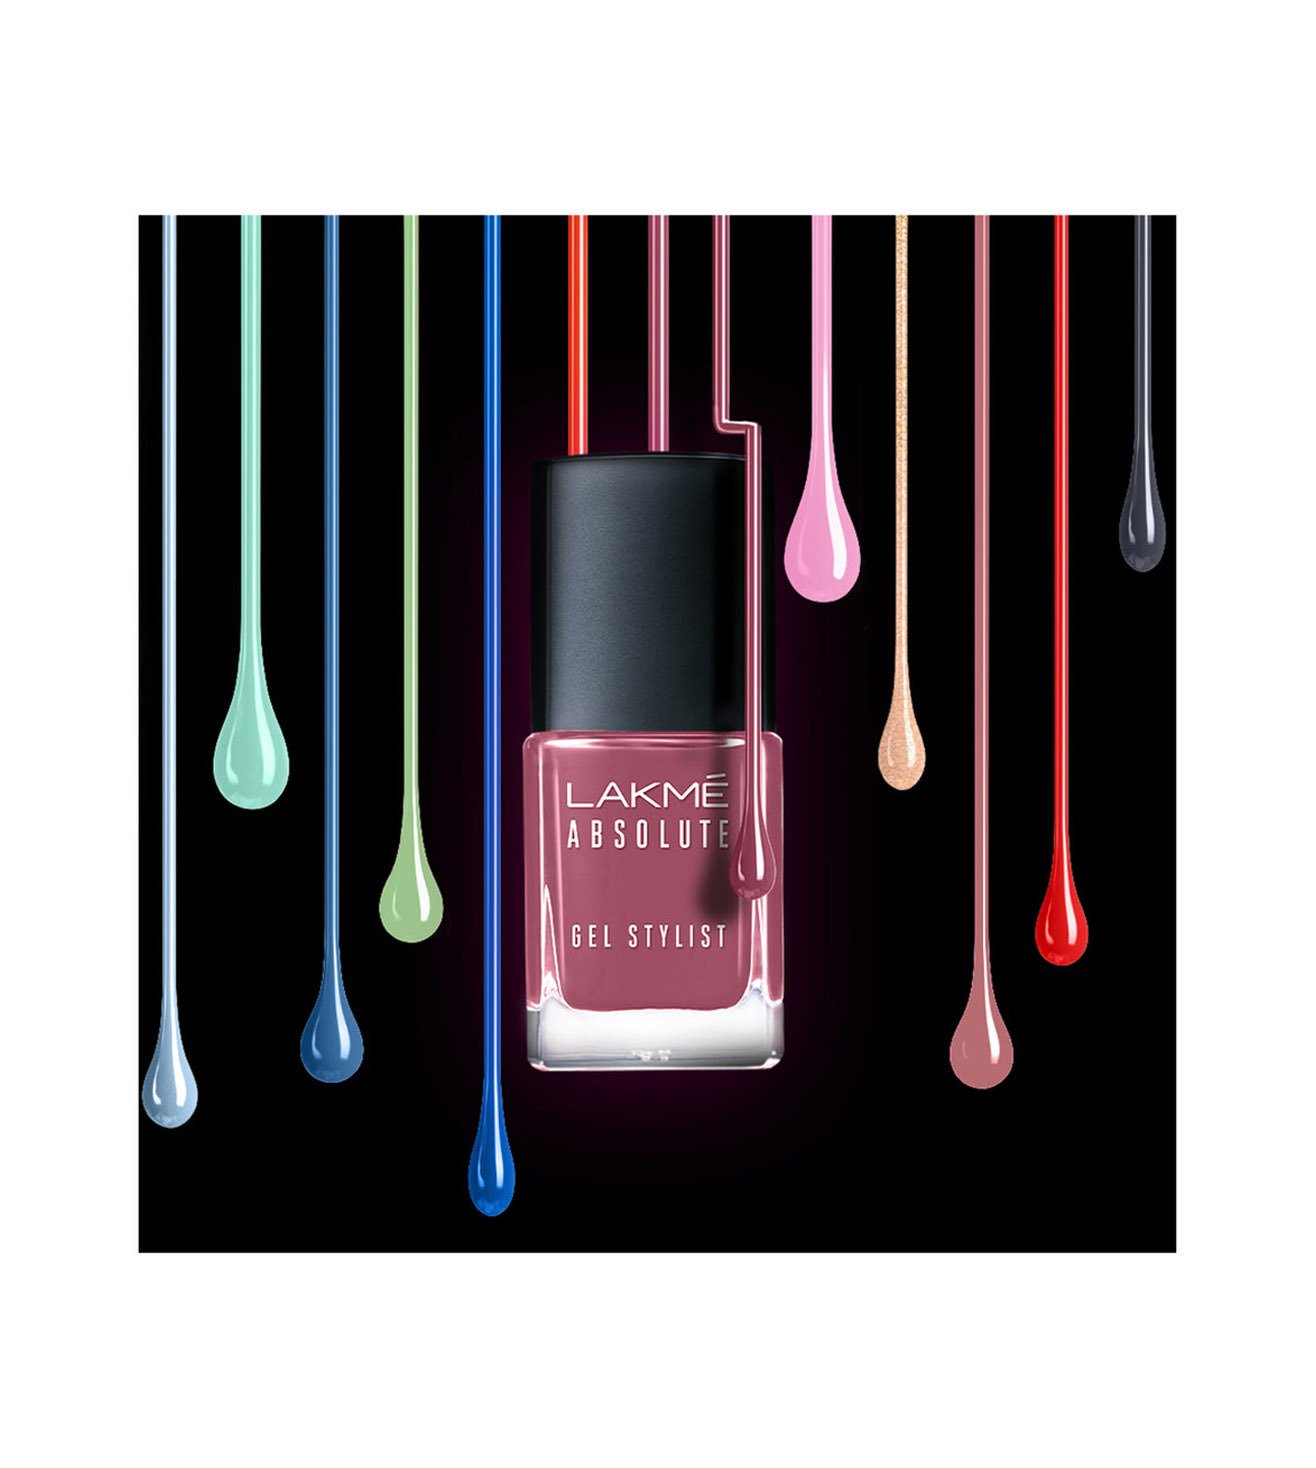 Lakme Absolute Gel Stylist Nail Color - 114 Shade (12ml)